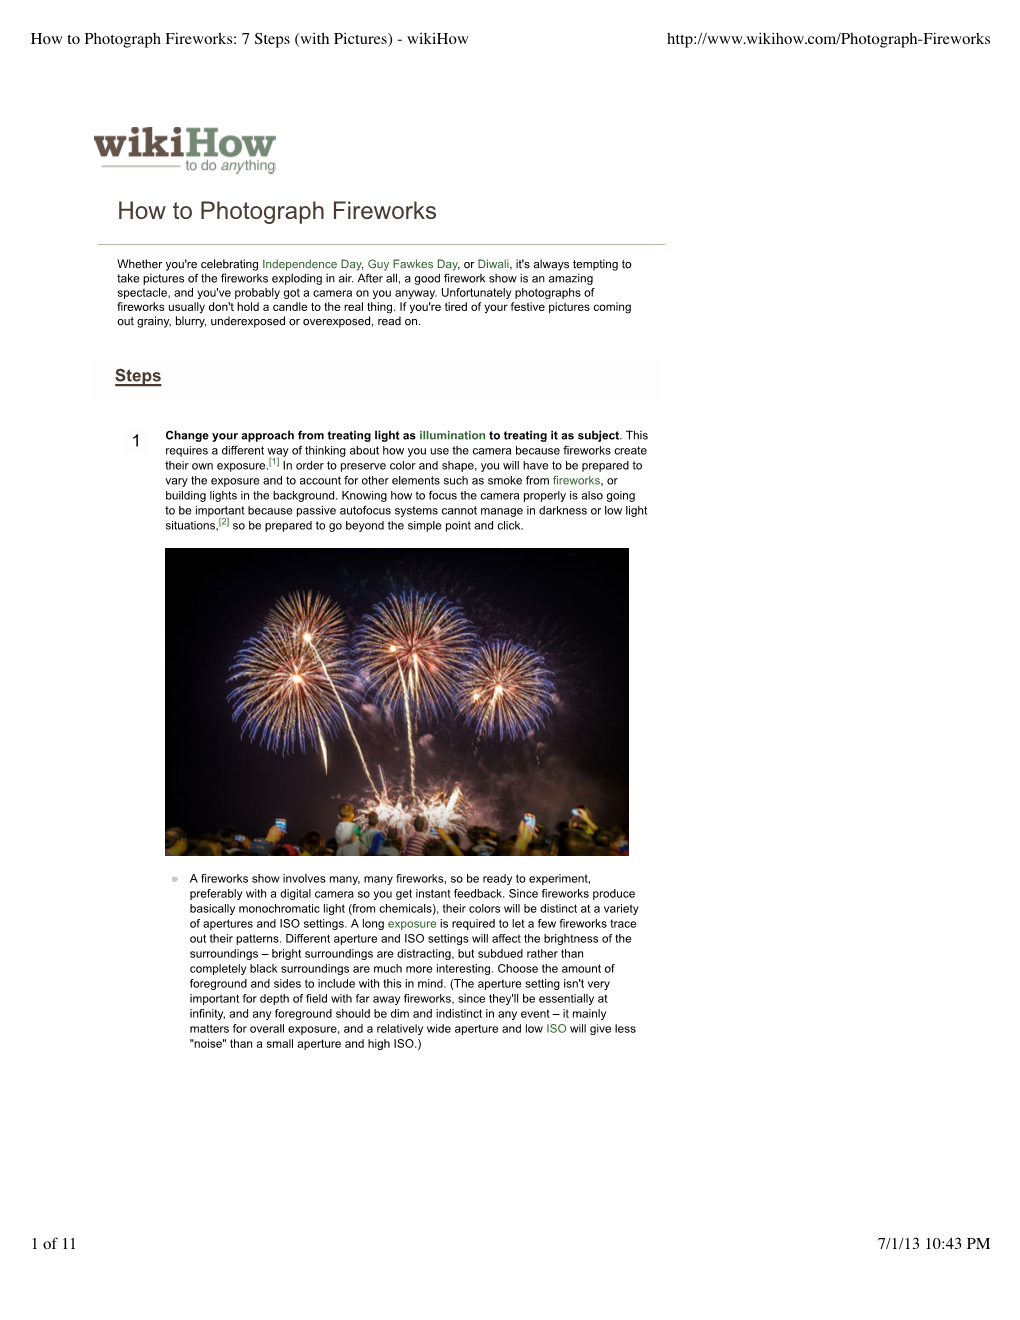 How to Photograph Fireworks: 7 Steps (With Pictures) - Wikihow